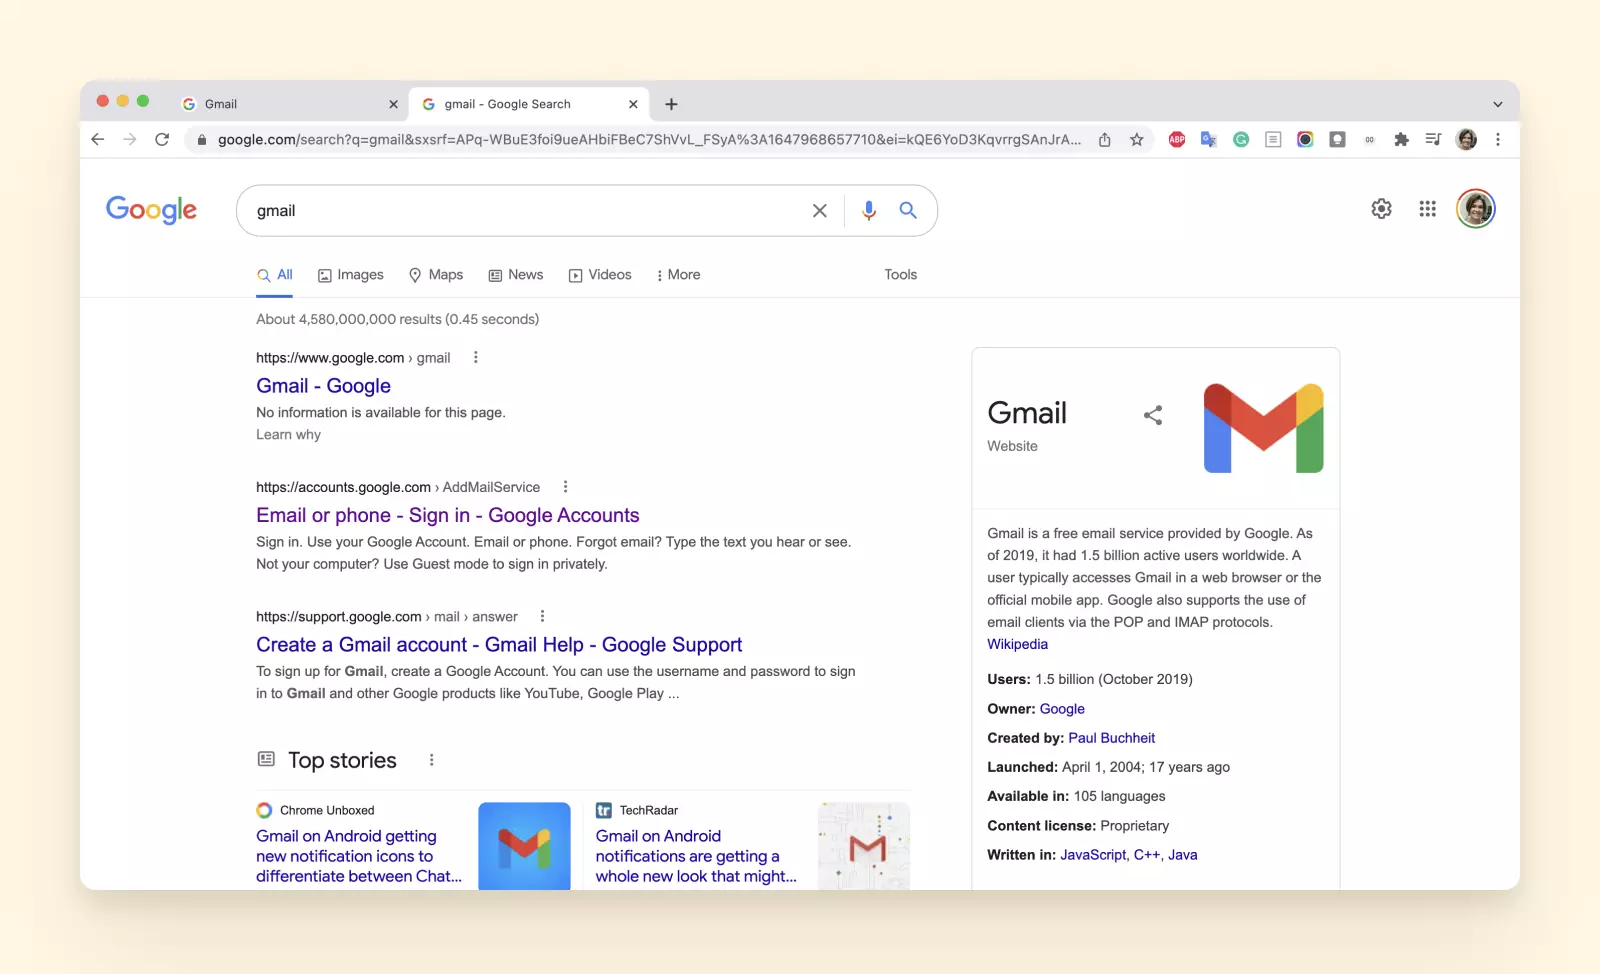 Search results for Gmail